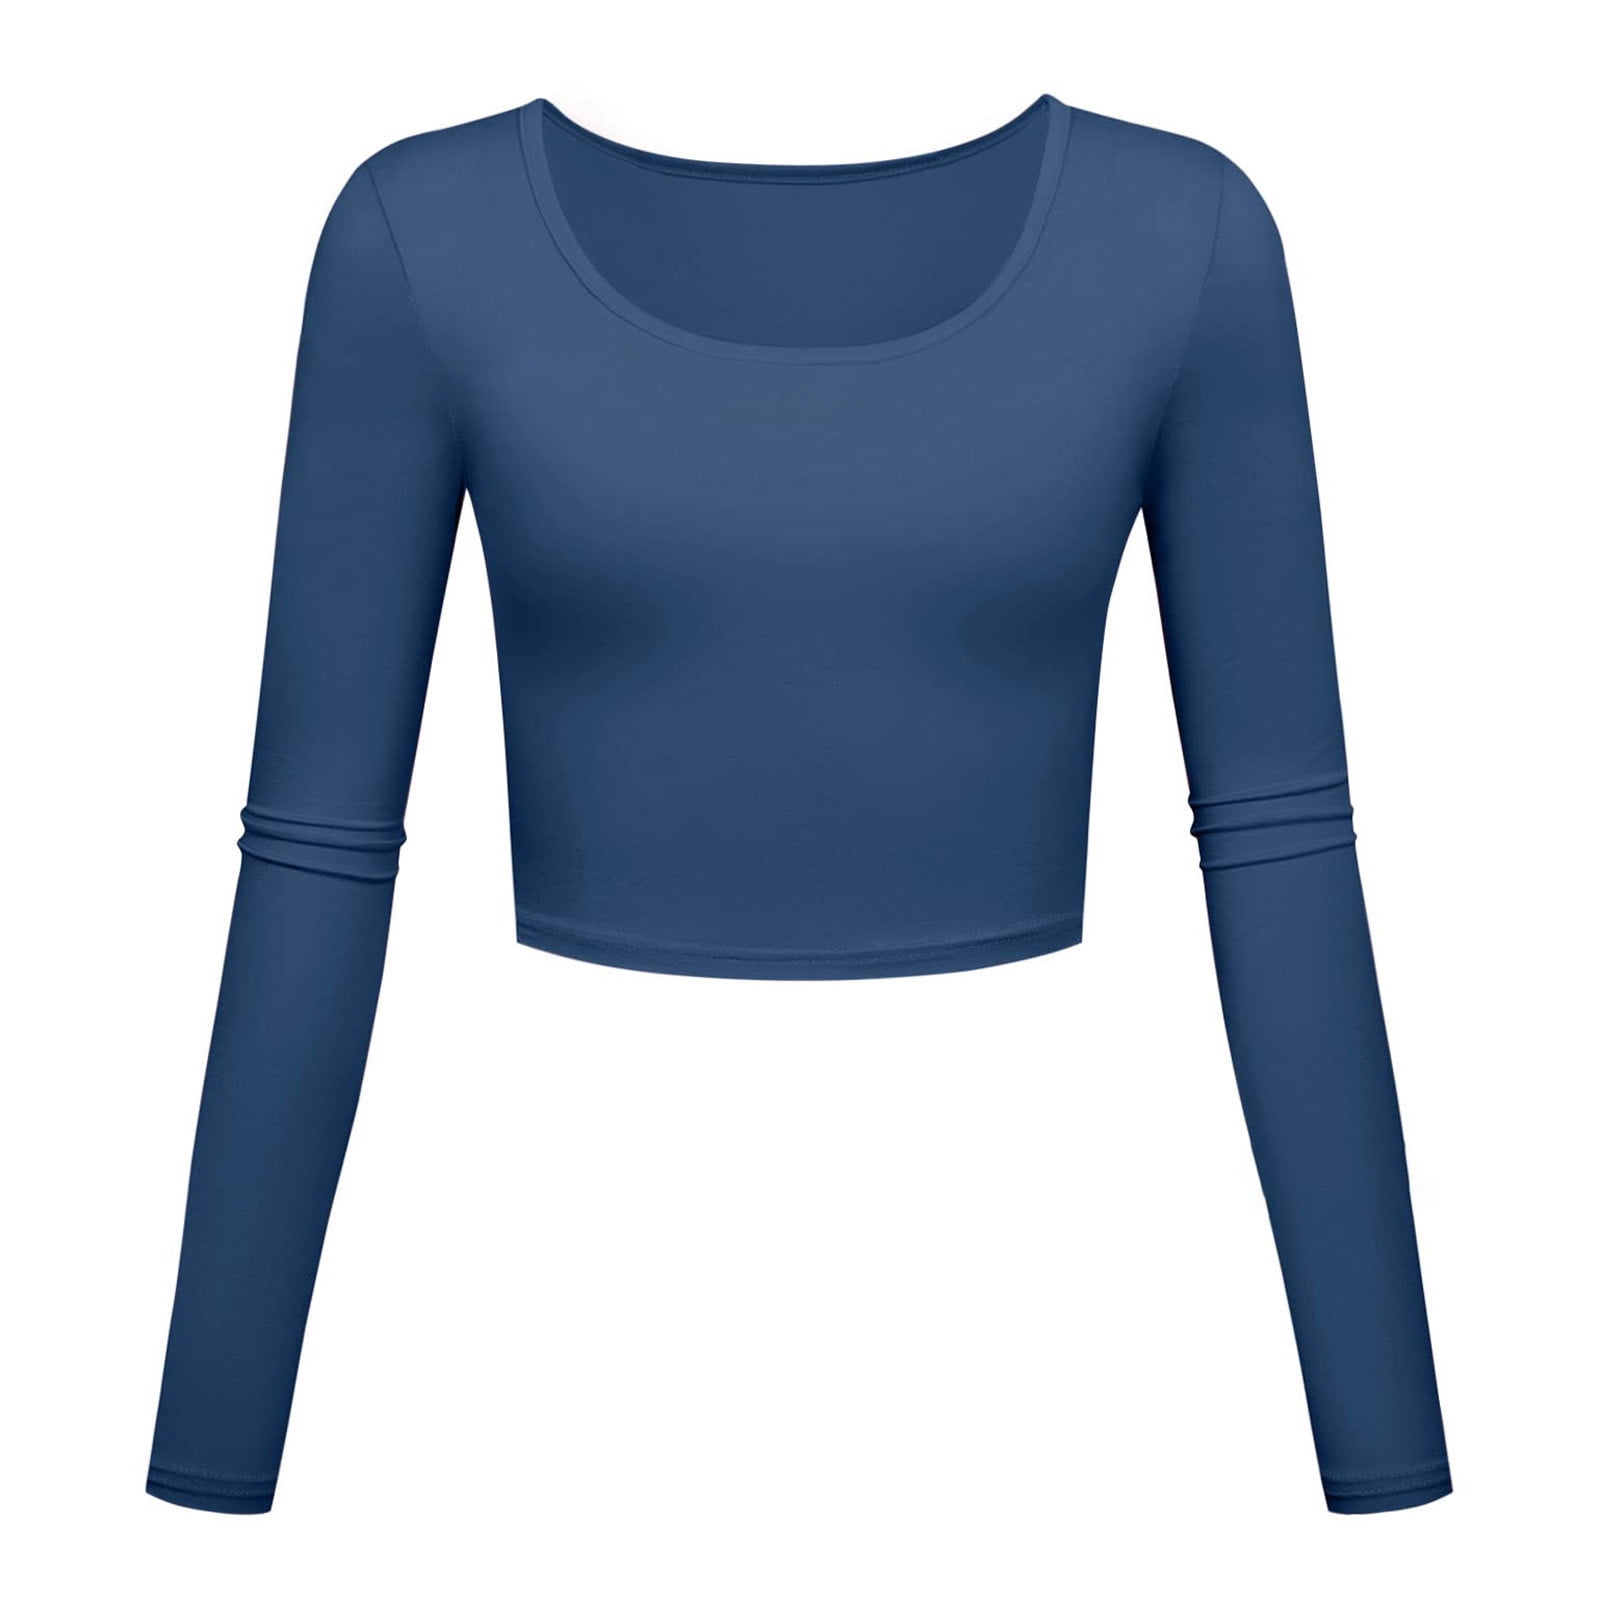 Luxalzxs Lightweight Basic Crop Tops Slim Fit Long Sleeve Workout Tops ...